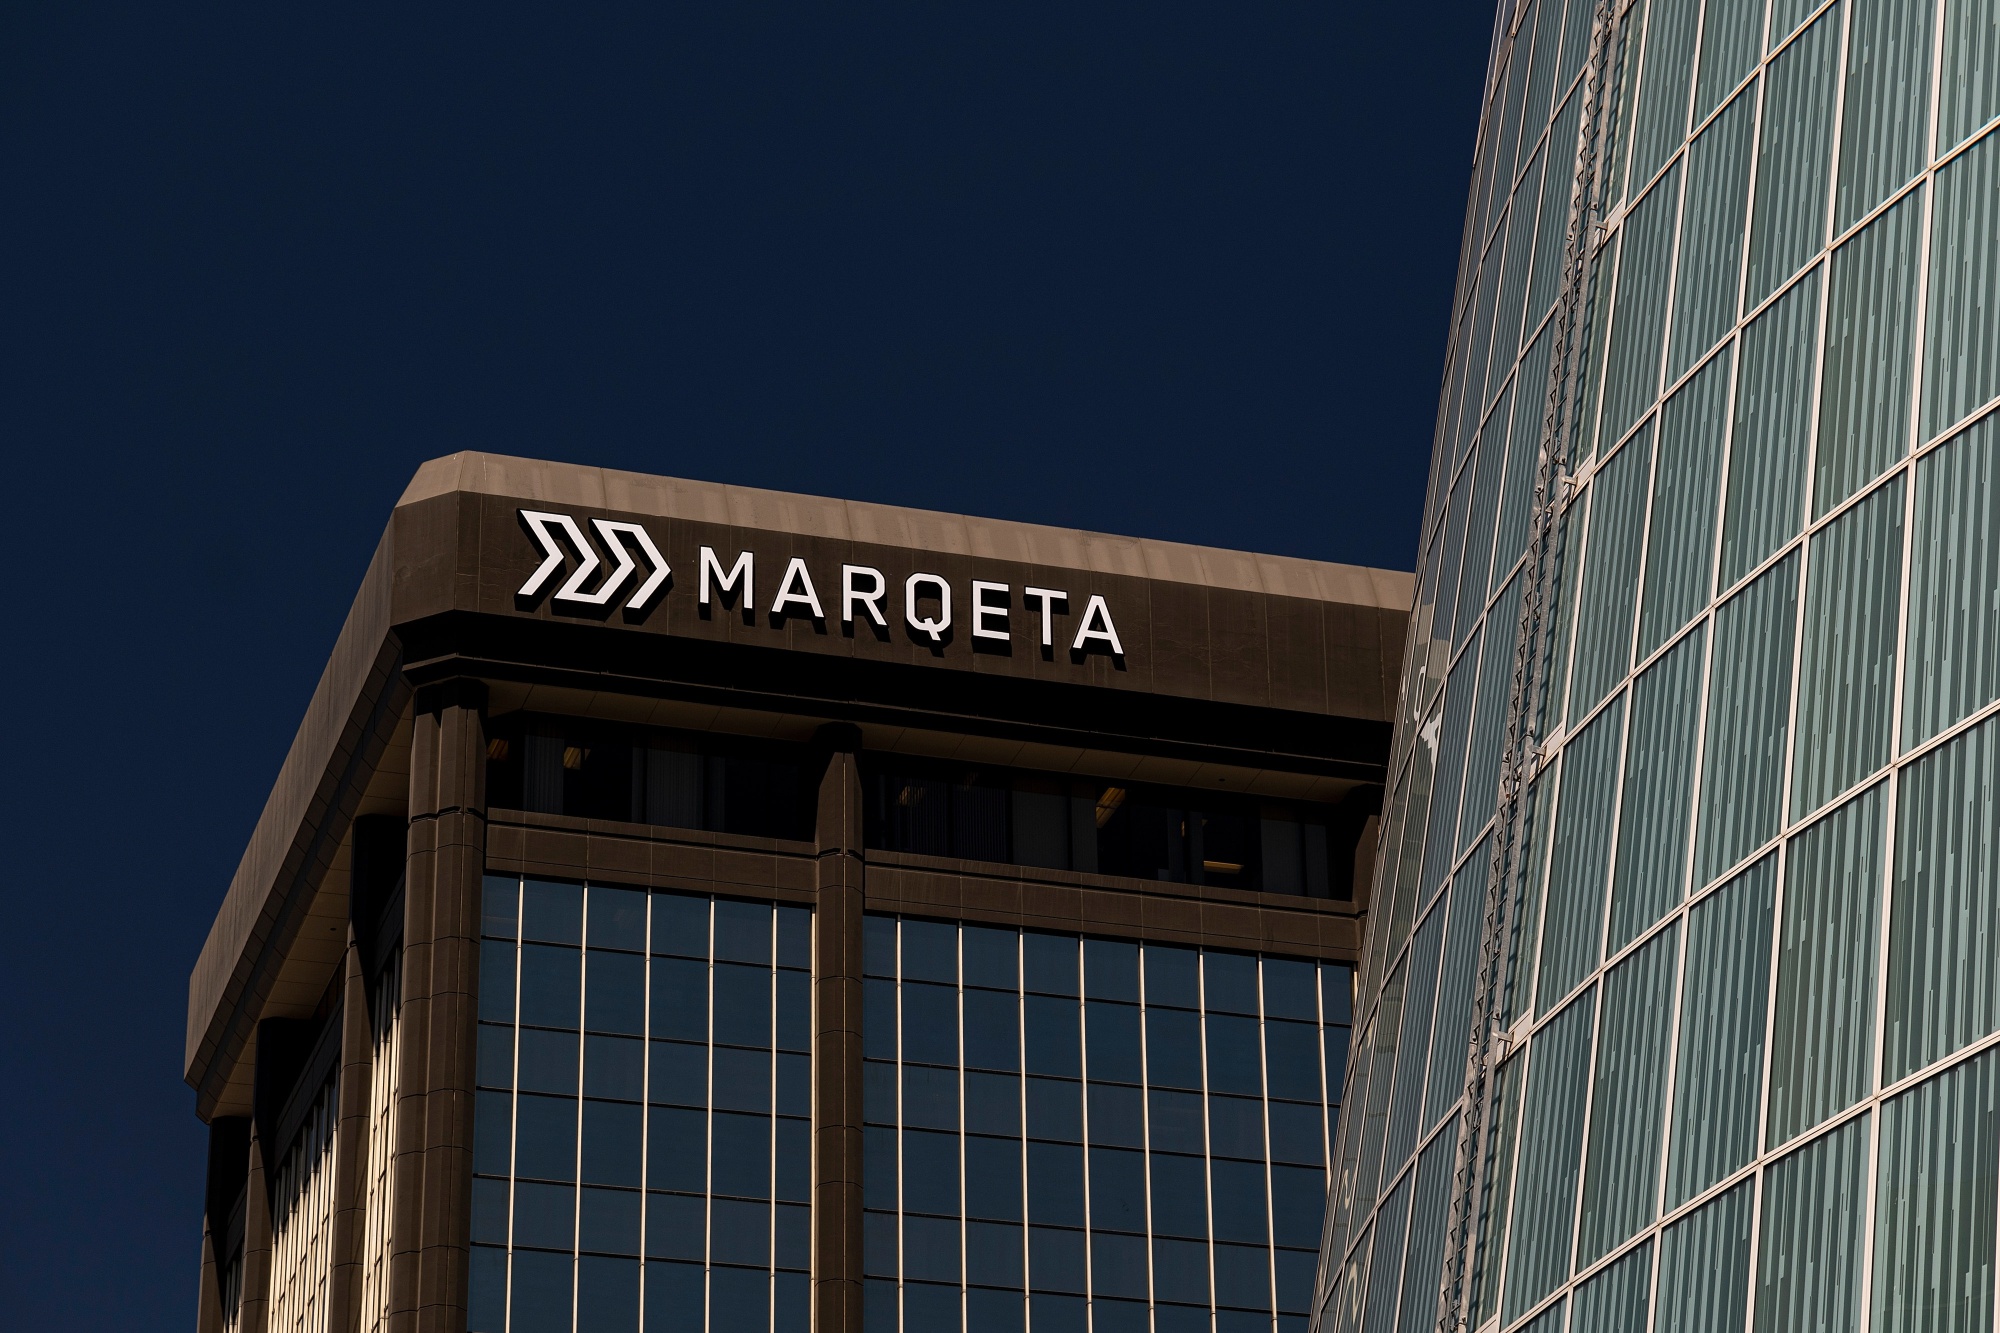 In its first acquisition, Marqeta acquires fintech company Power Finance for $275 million in cash